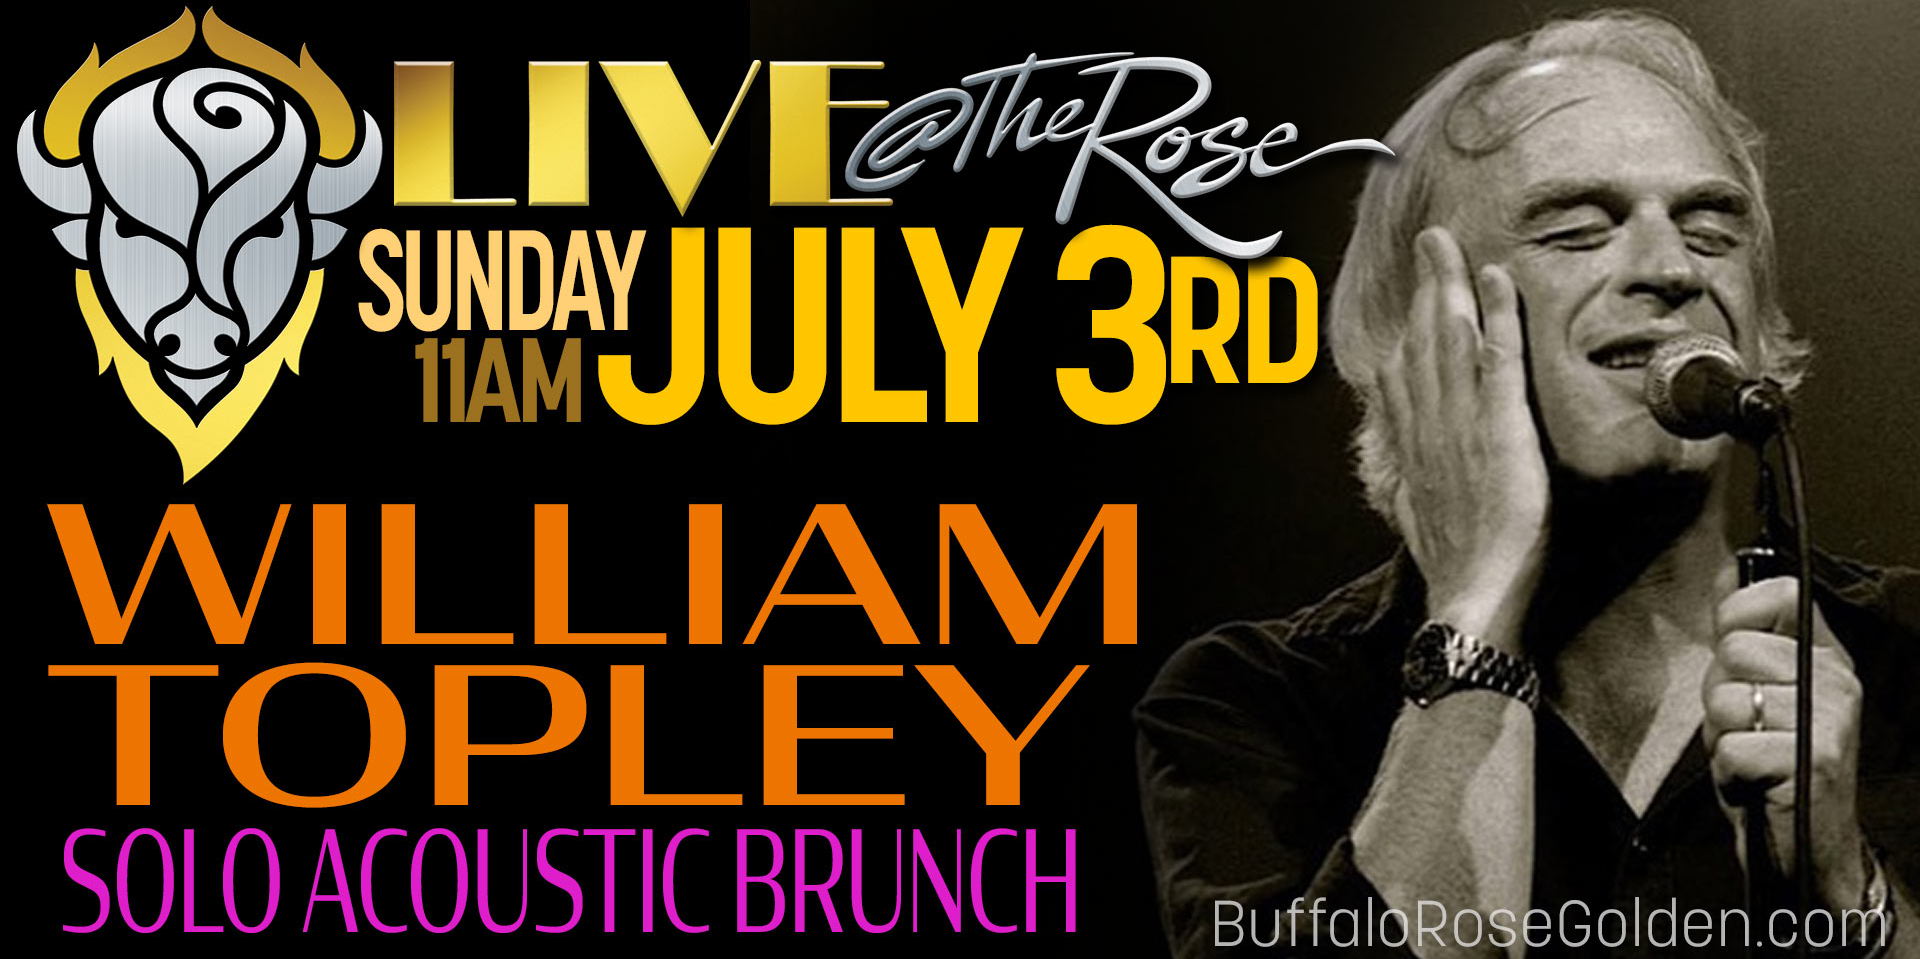 Live @ The Rose - William Topley Solo Acoustic Brunch promotional image